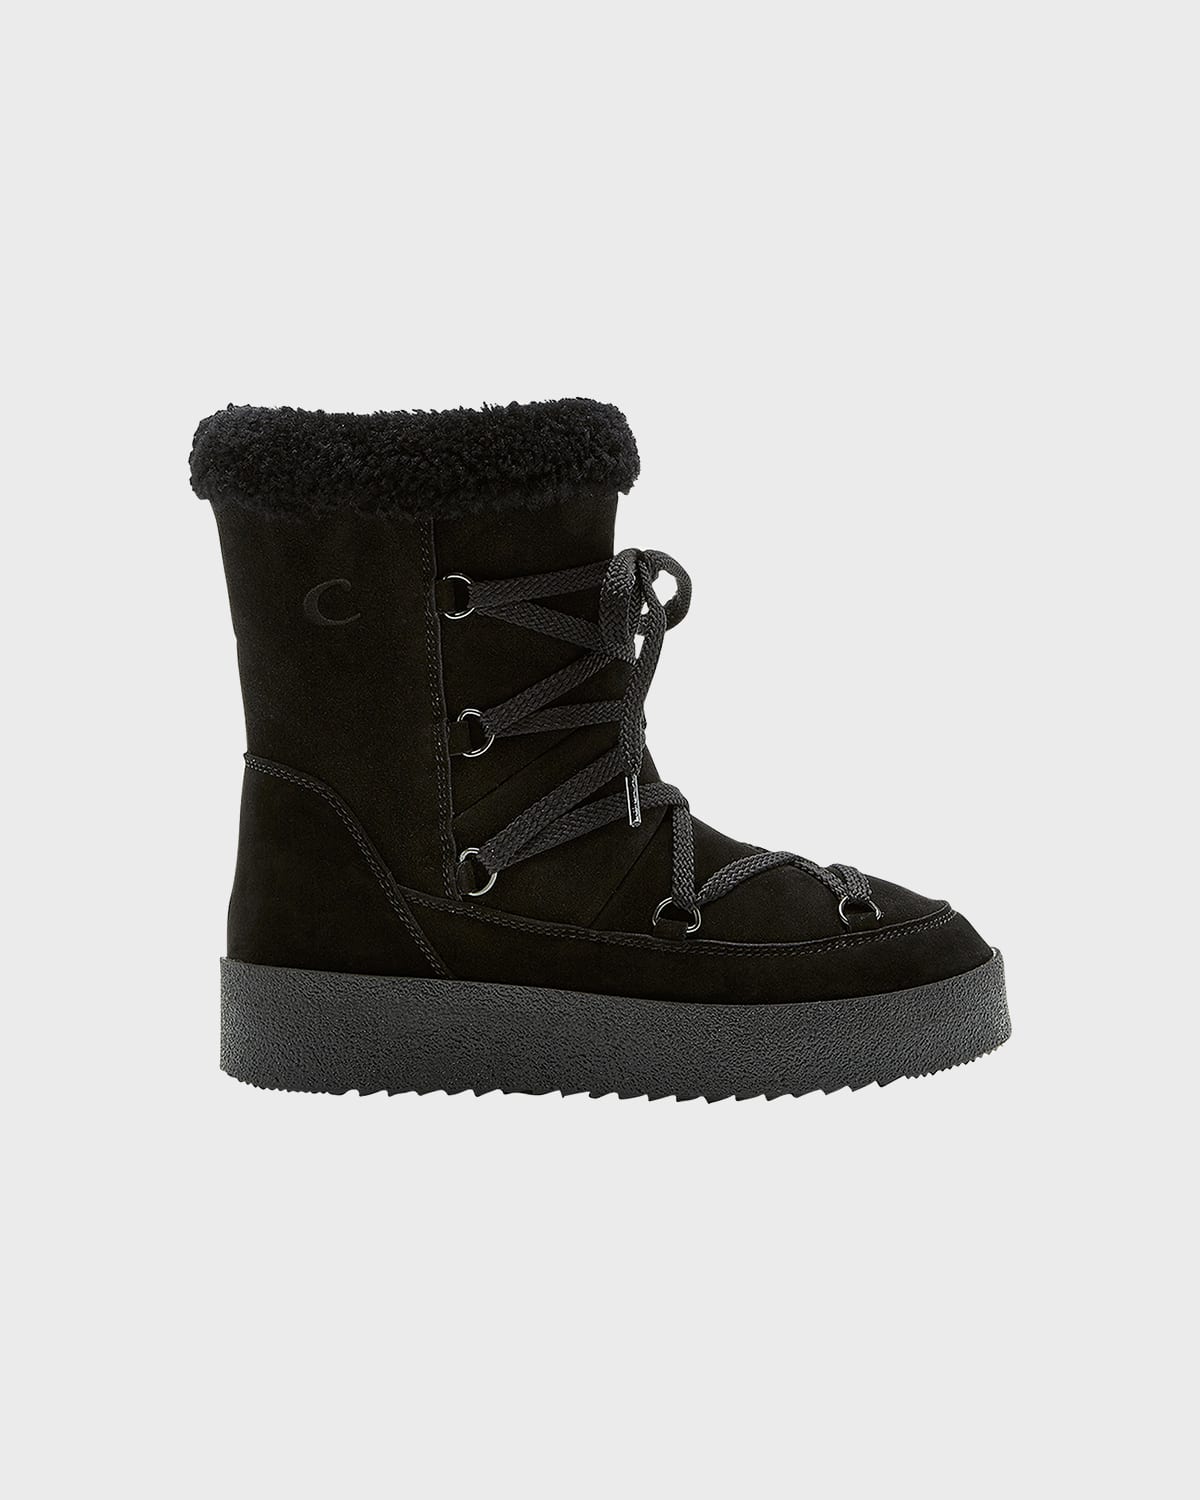 Emery Suede Shearling Snow Boots